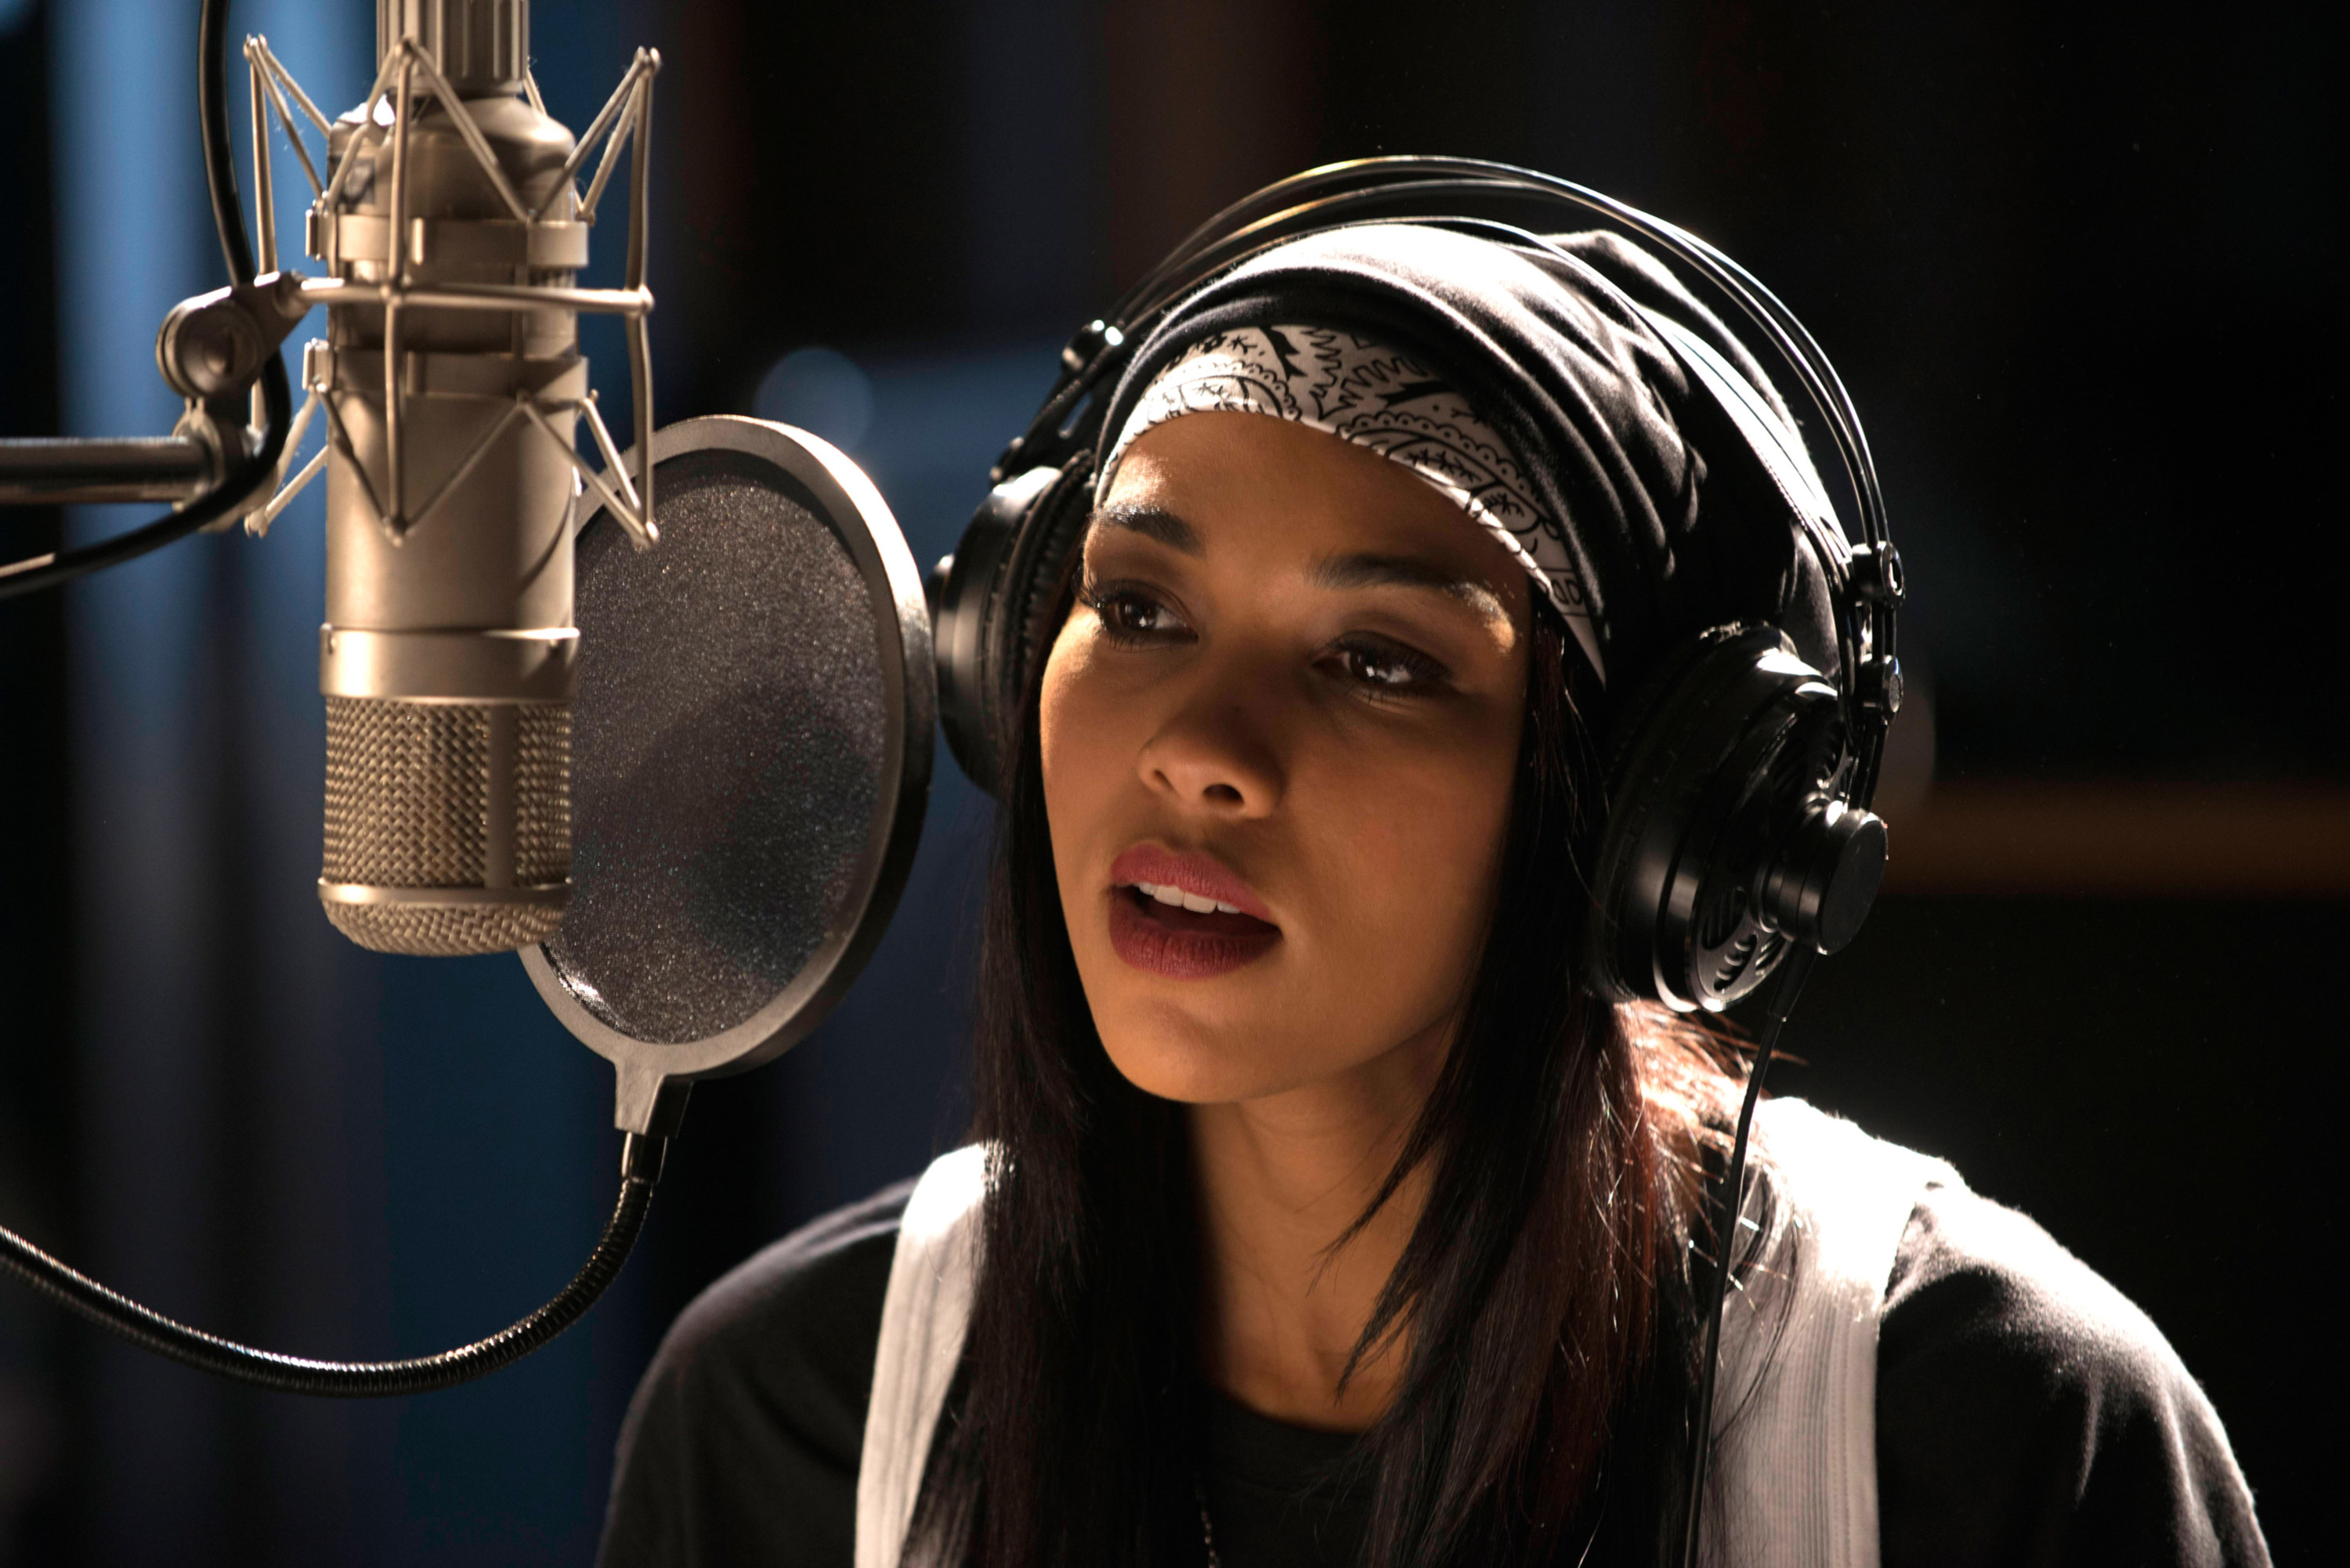 Alexandra in the role sitting behind a mic in a recording studio